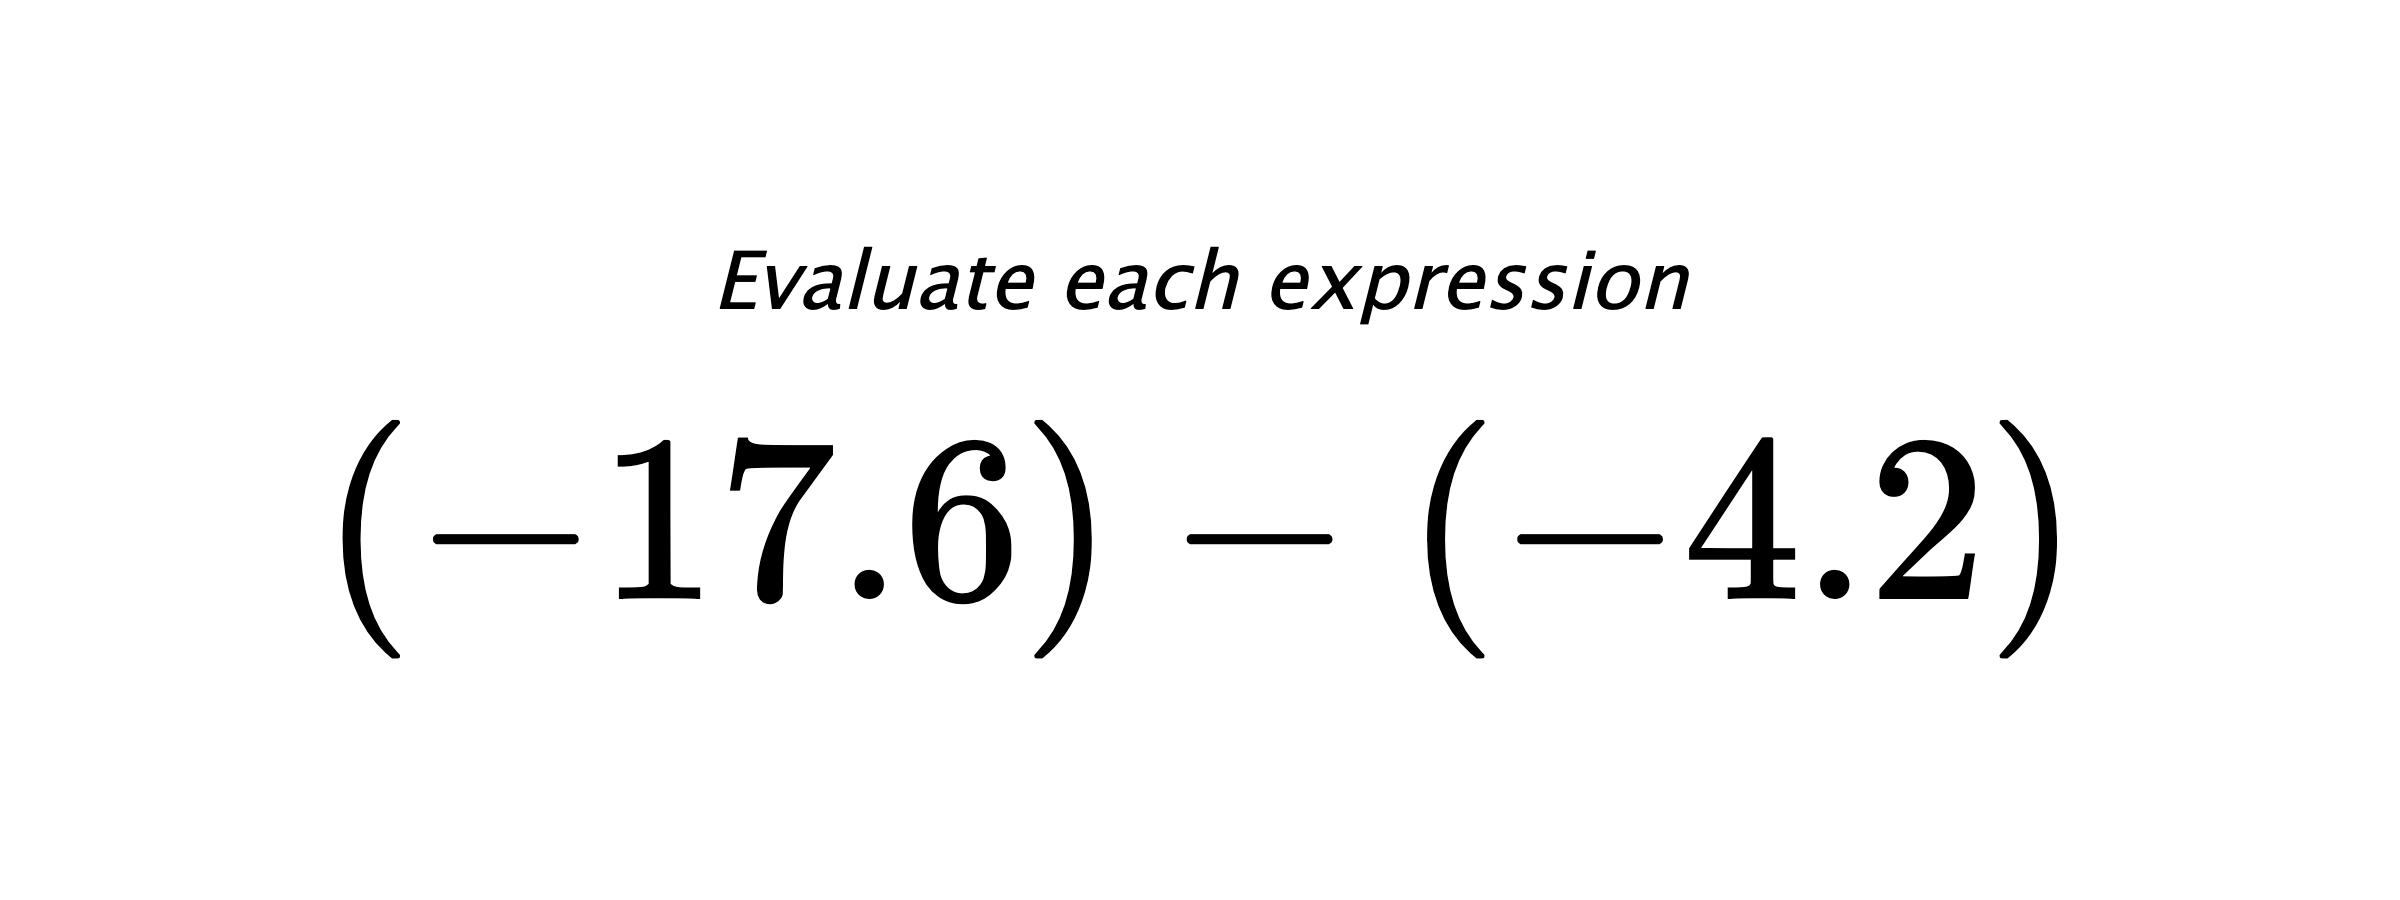 Evaluate each expression $ (-17.6)-(-4.2) $